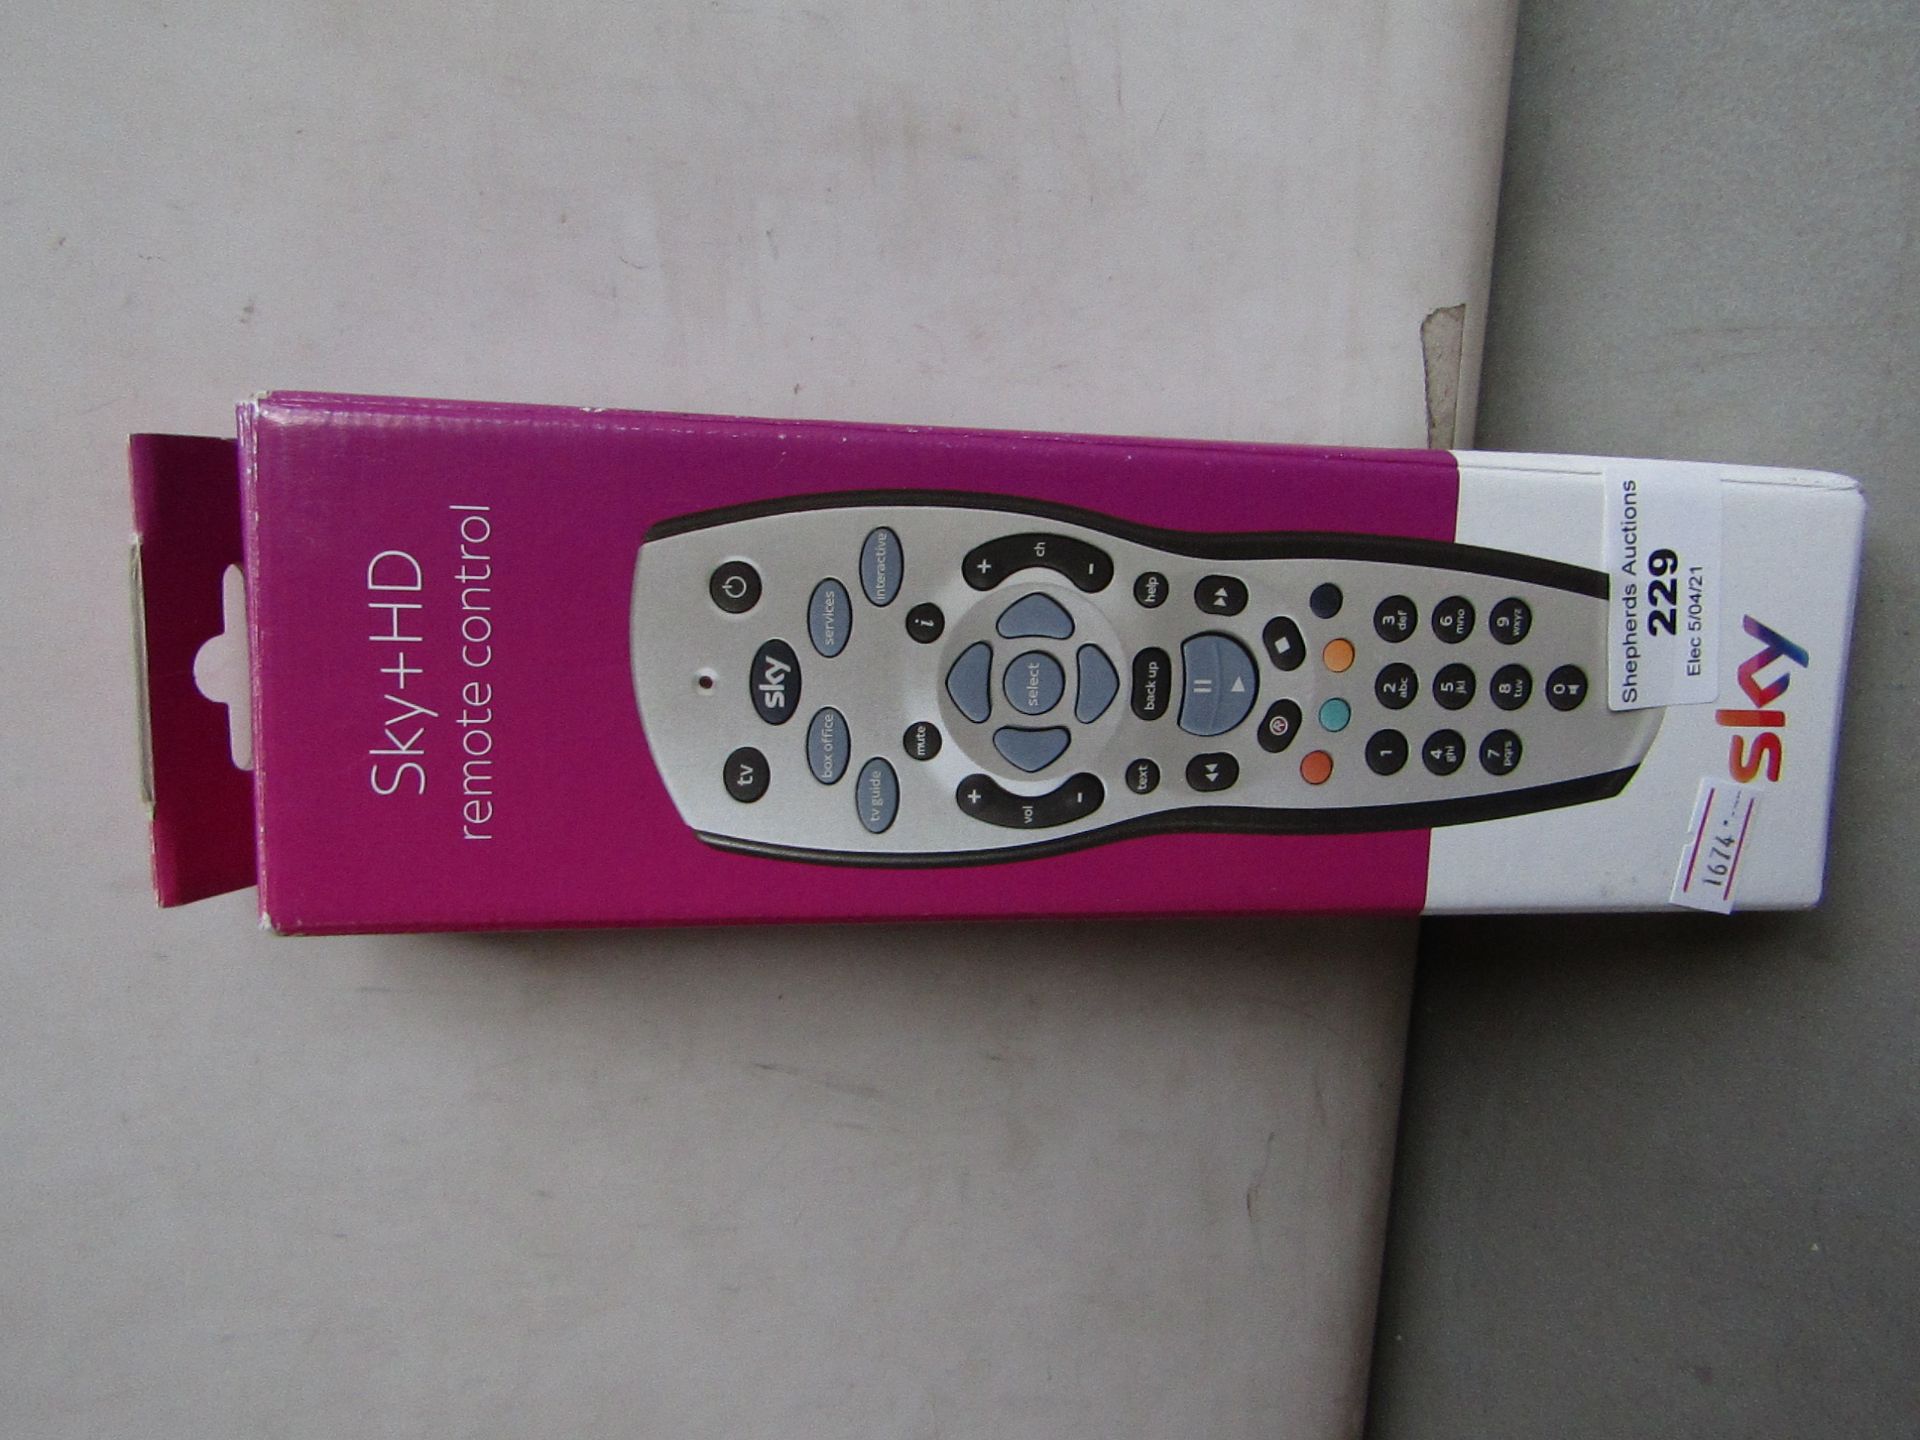 Sky + HD remote, unchecked and boxed.